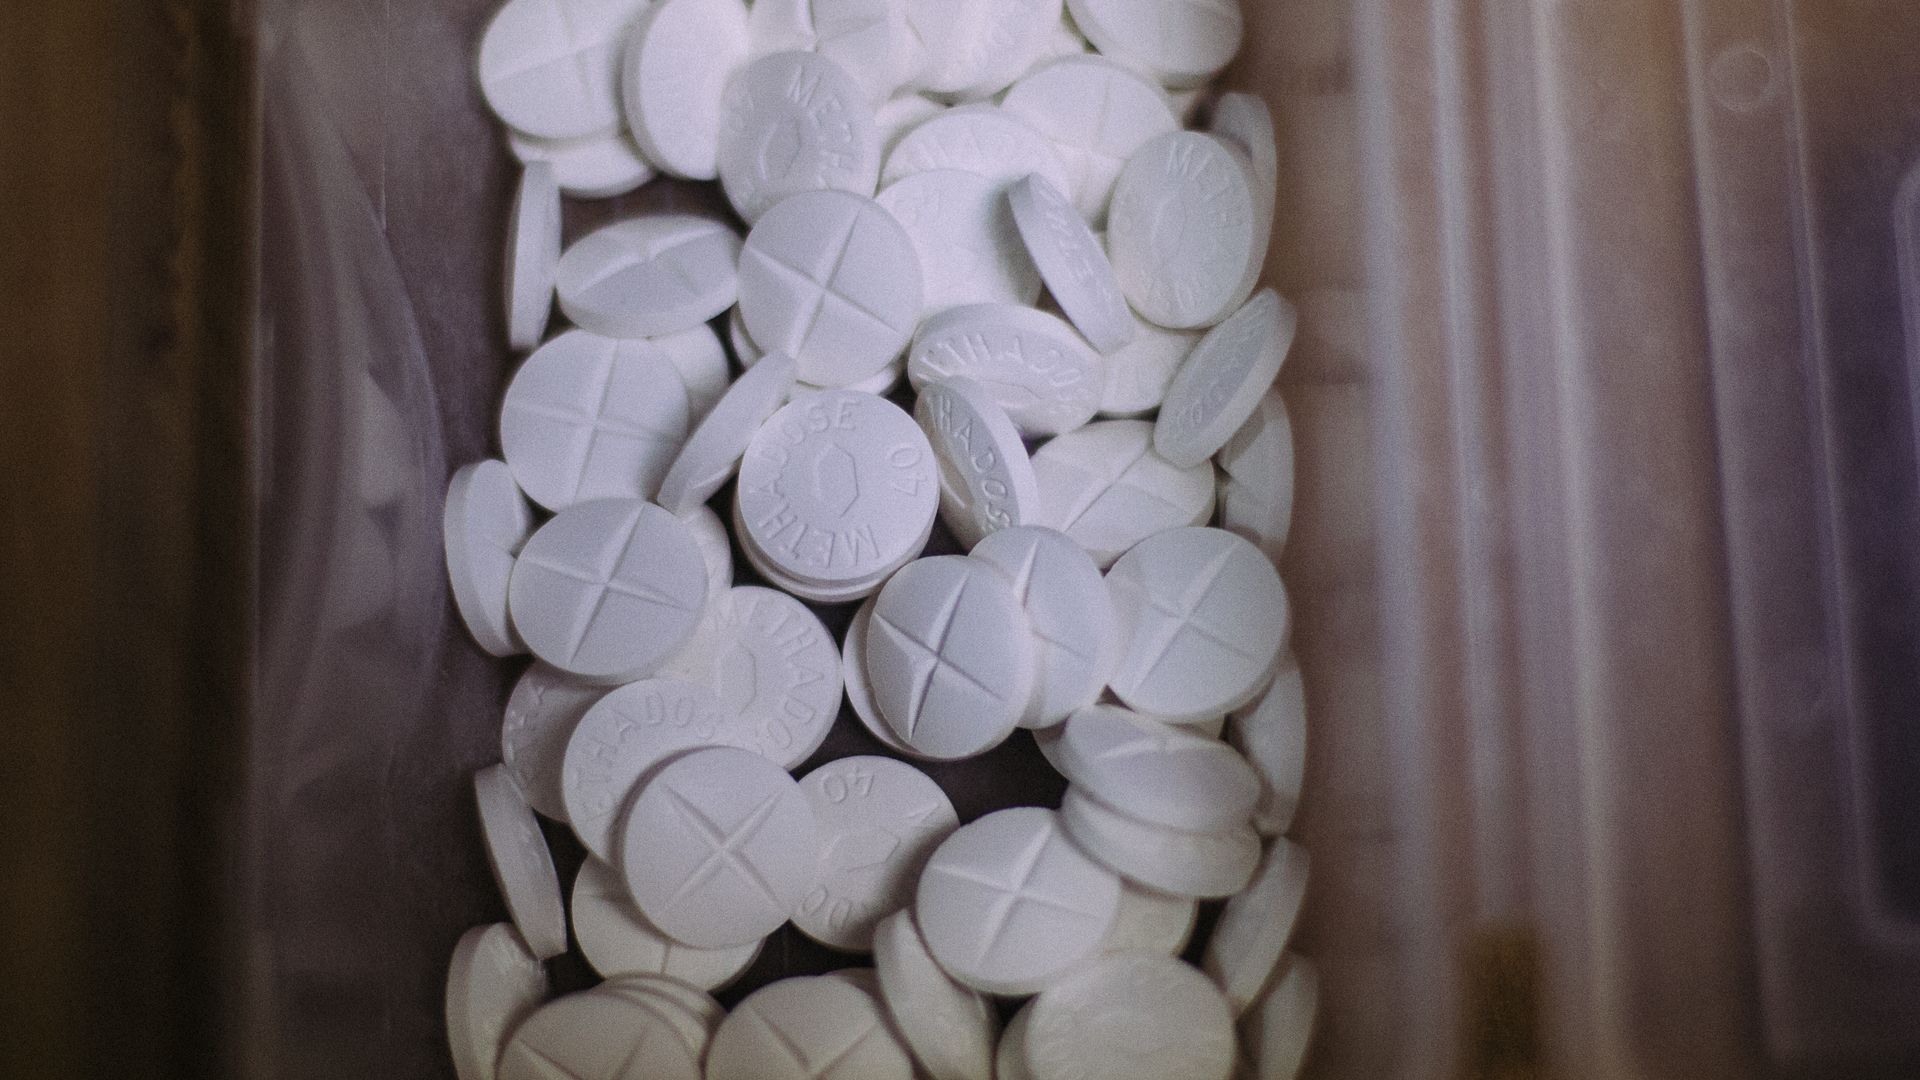 Methadose tablets, the concentrated form of Methadone.